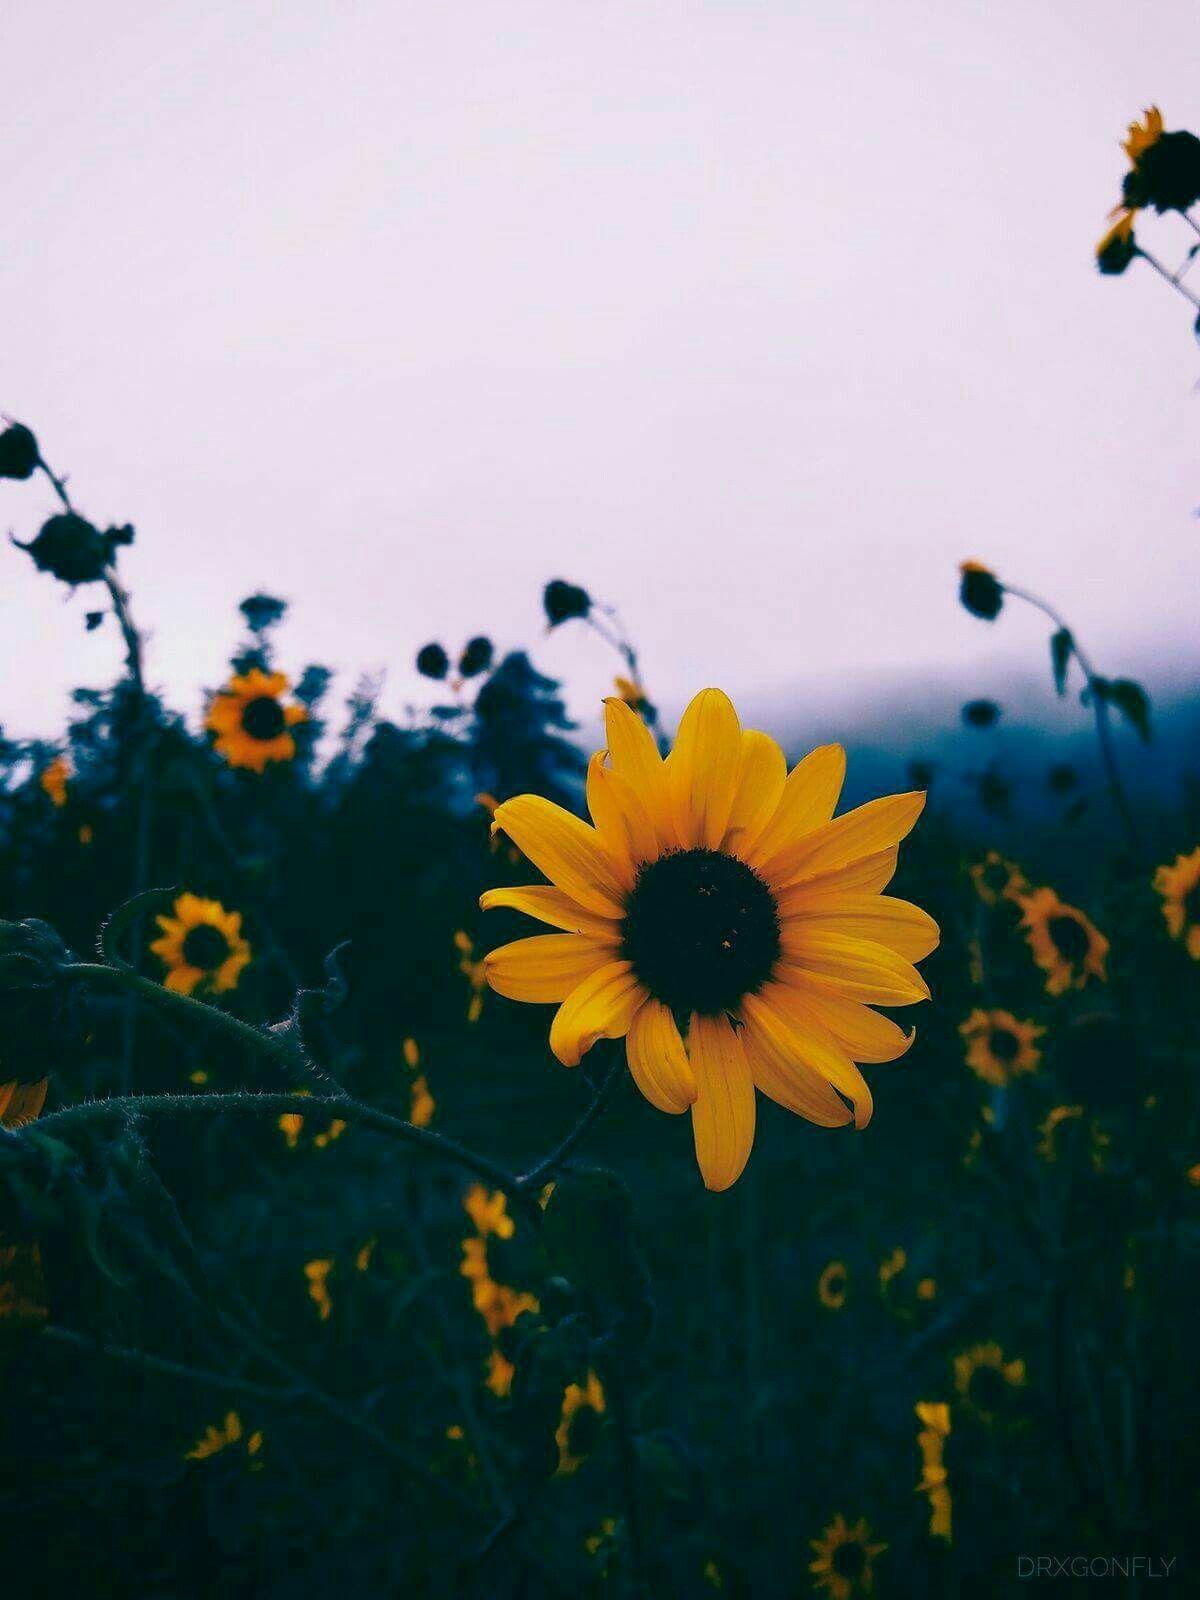 Aesthetic Sunflower Wallpapers - Wallpaper Cave